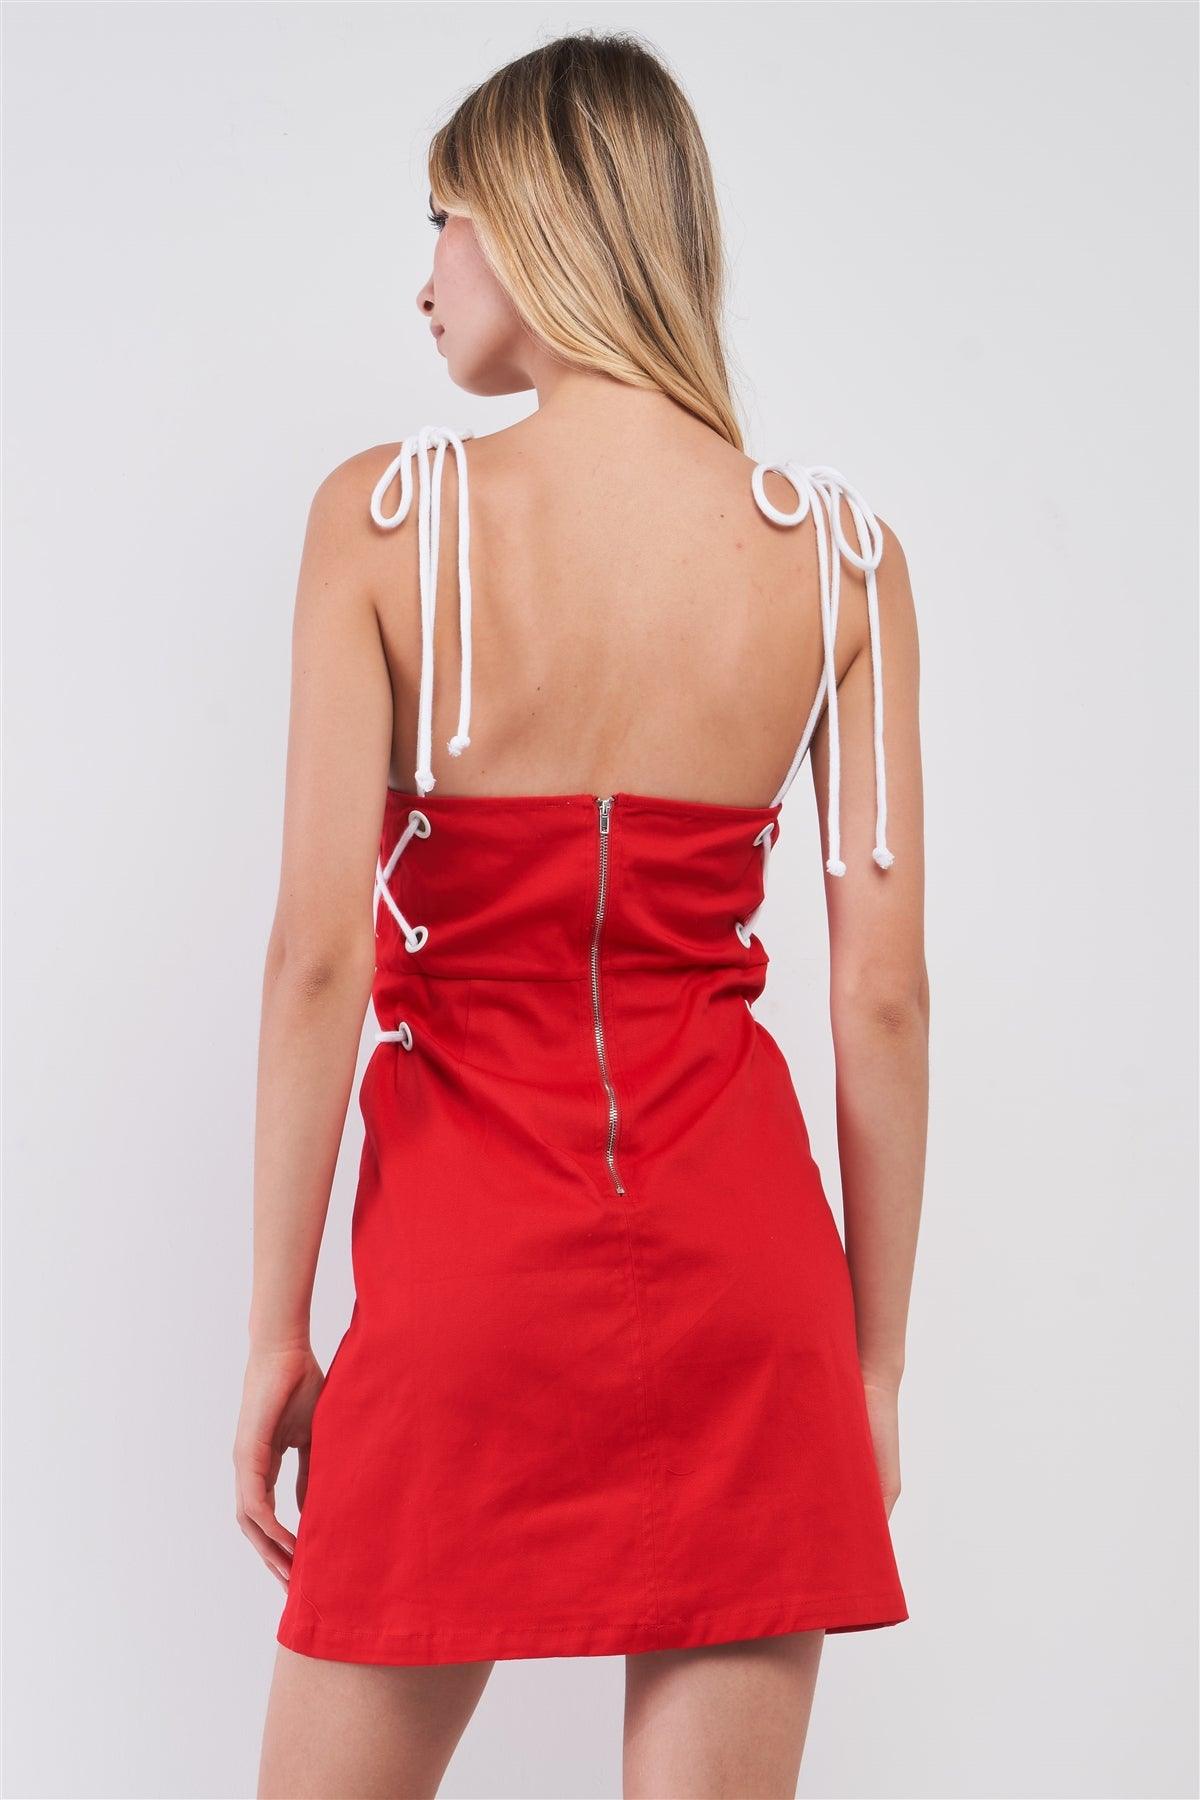 Red & White Lace-Up Straps Sleeveless Square Neck Fitted Mini Dress /1-2-1